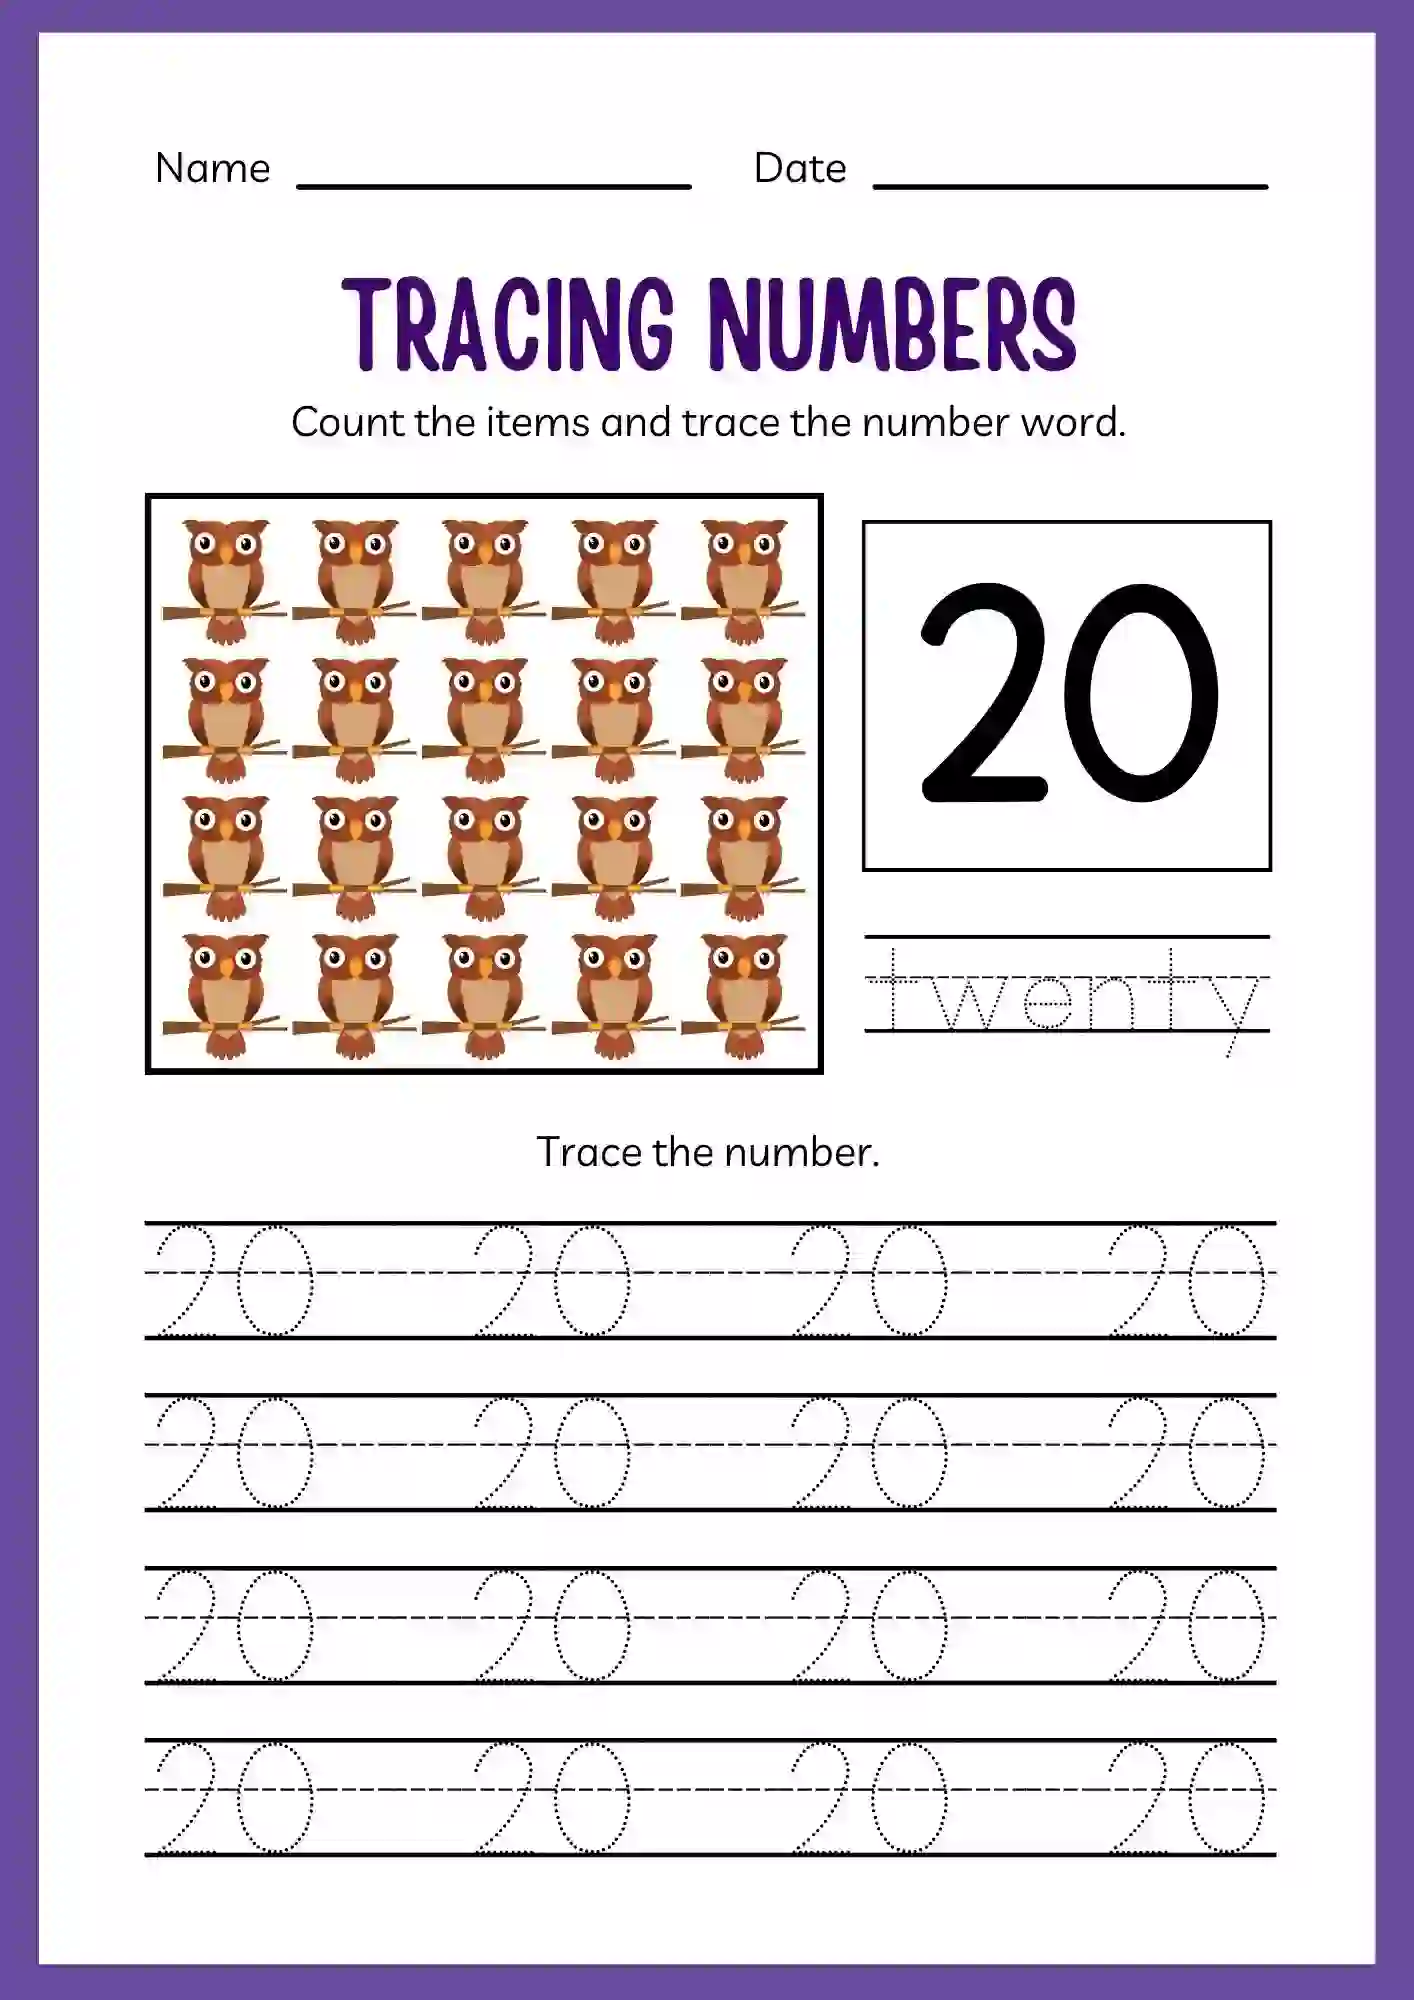 Number Tracing Worksheets 1 to 20 (Number 20 tracing sheet)